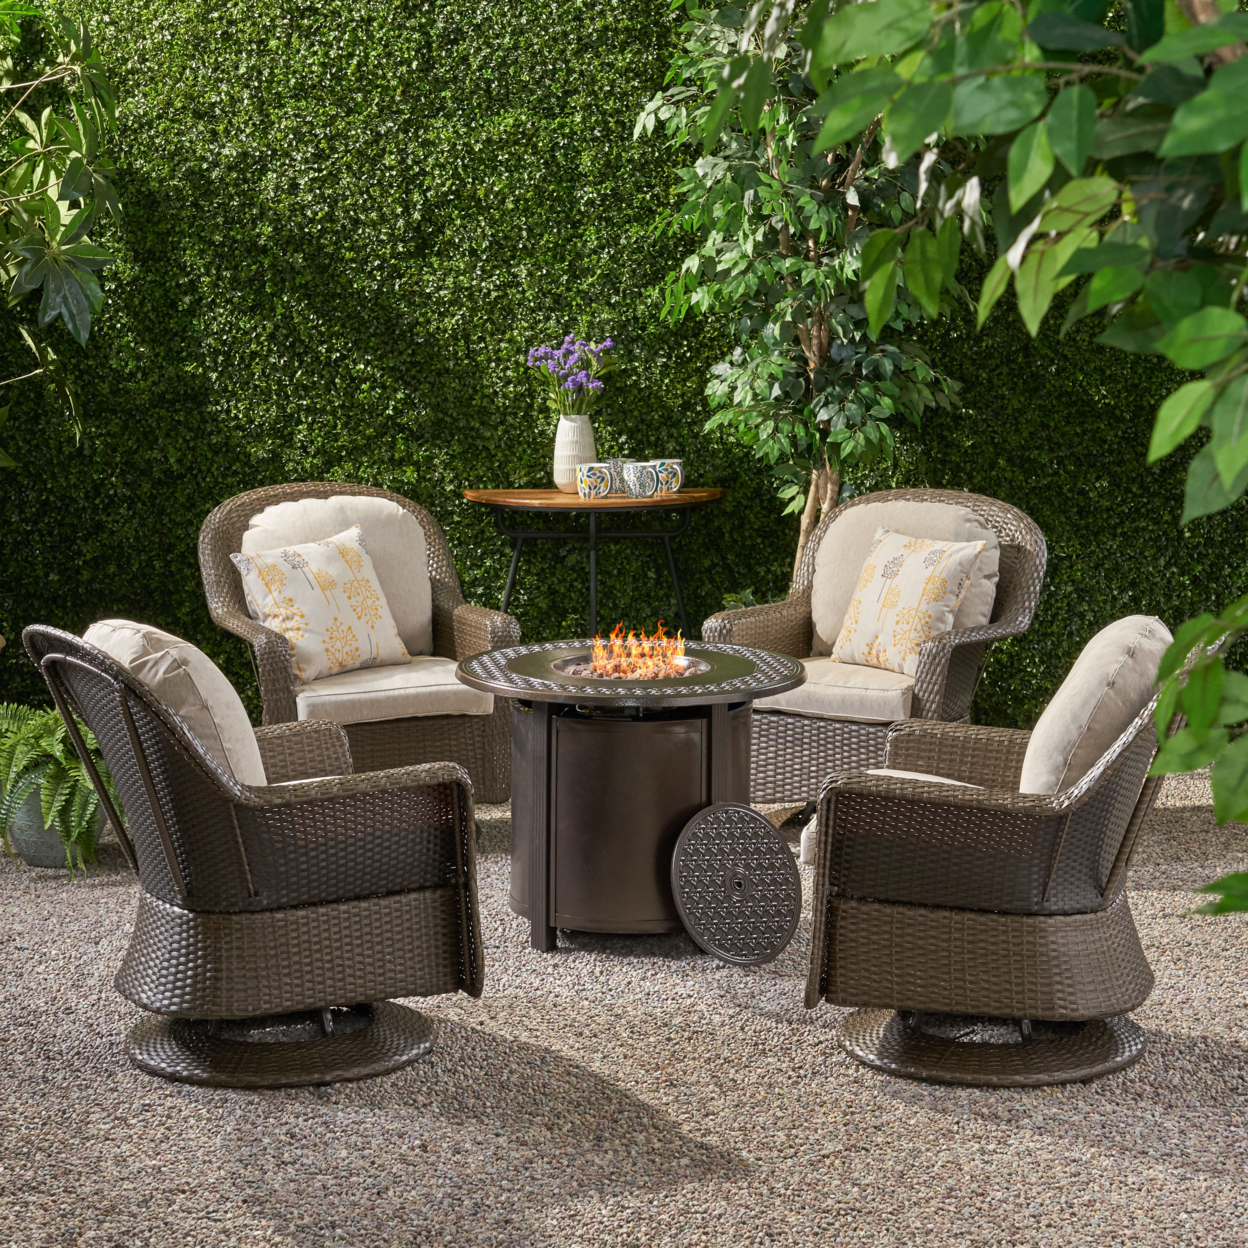 Linsten Outdoor 4 Seater Wicker Swivel Chair And Fire Pit Set - Brown/gray